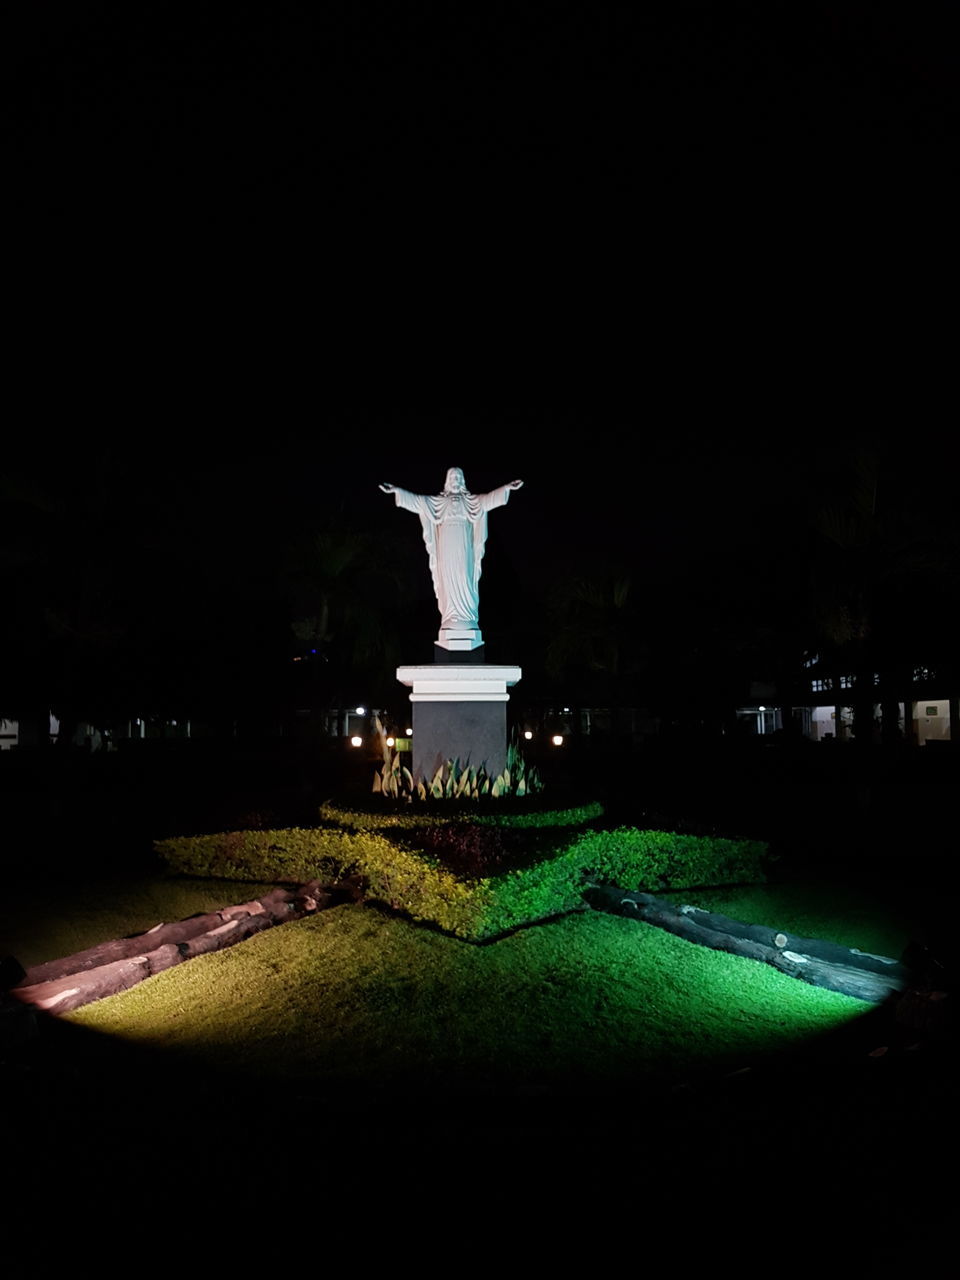 night, no people, art and craft, representation, sculpture, nature, creativity, illuminated, statue, copy space, grass, park, green color, park - man made space, human representation, plant, sky, outdoors, lighting equipment